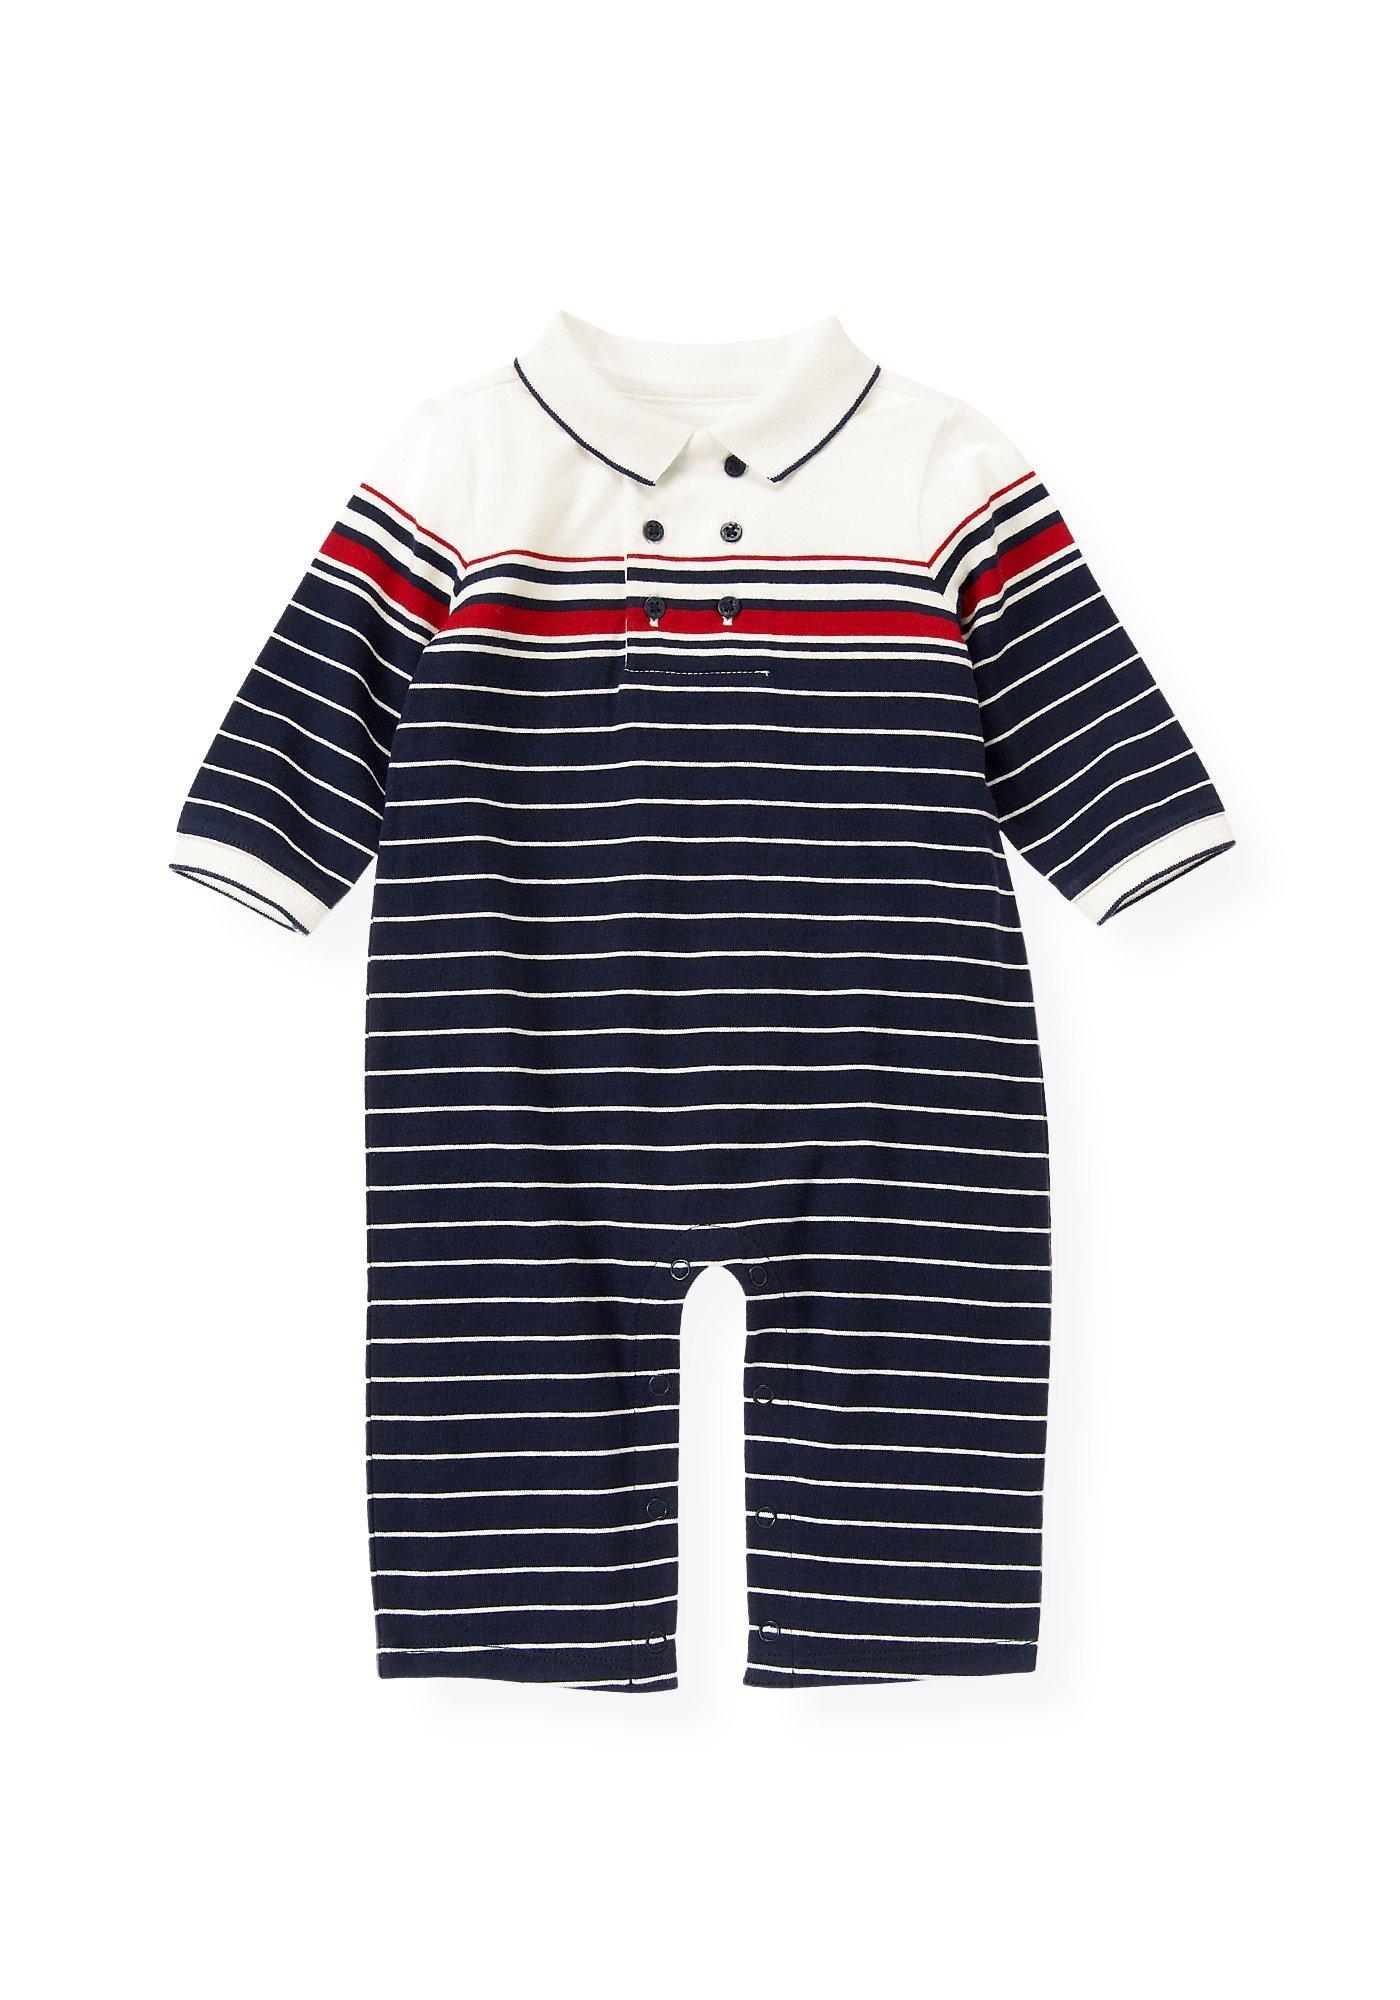 Engineer Stripe Polo One-Piece image number 0